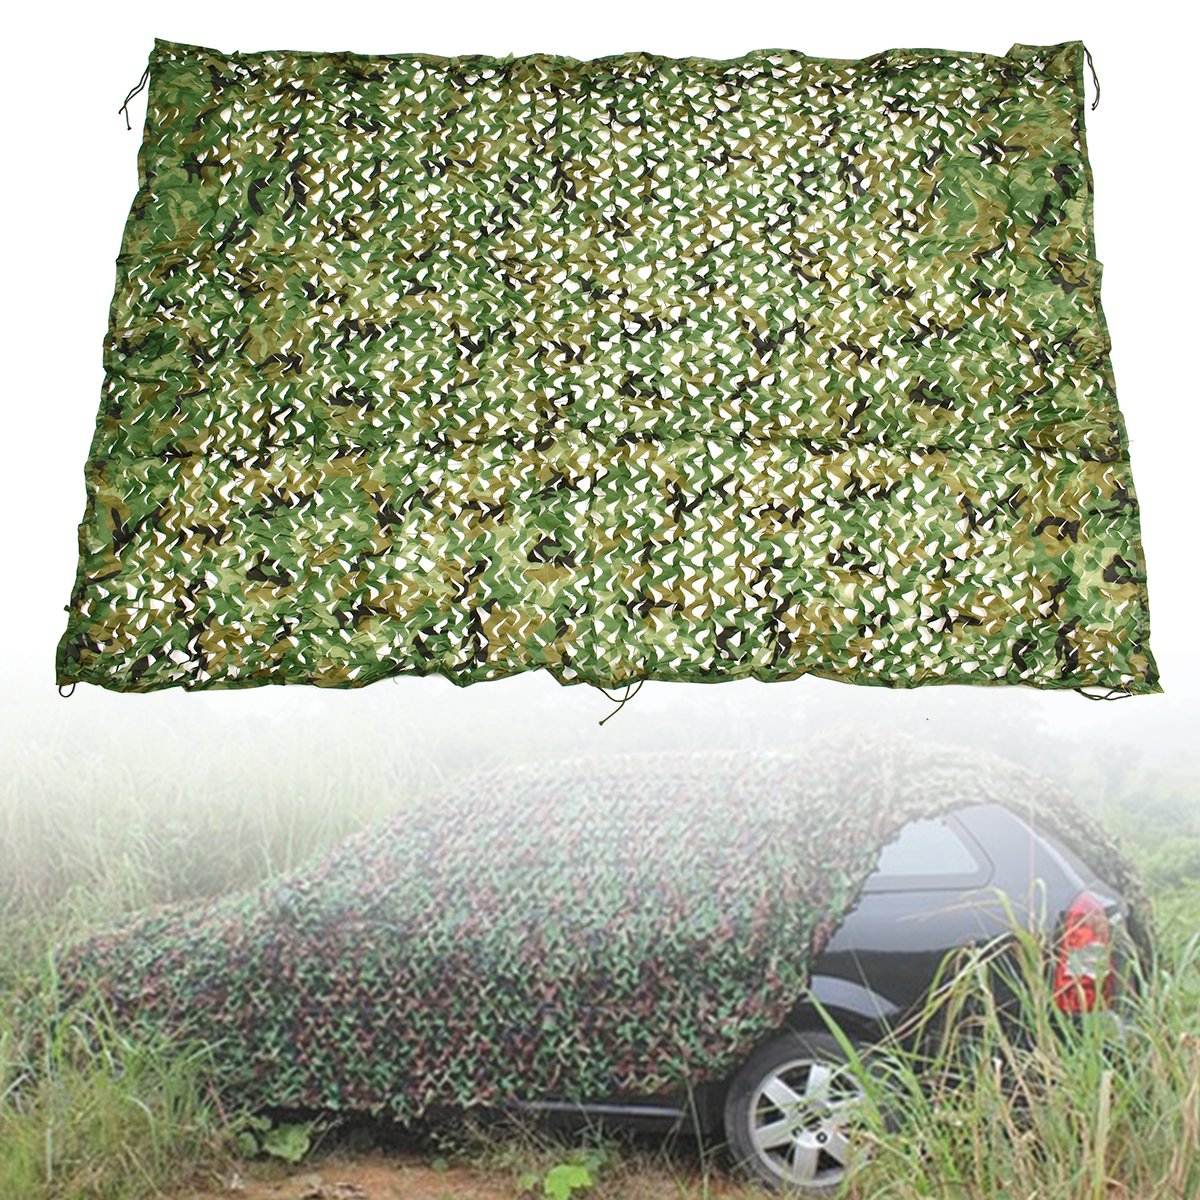 Army training Outdoor Camouflage Nets Car Covers Tent Shade Camo Netting